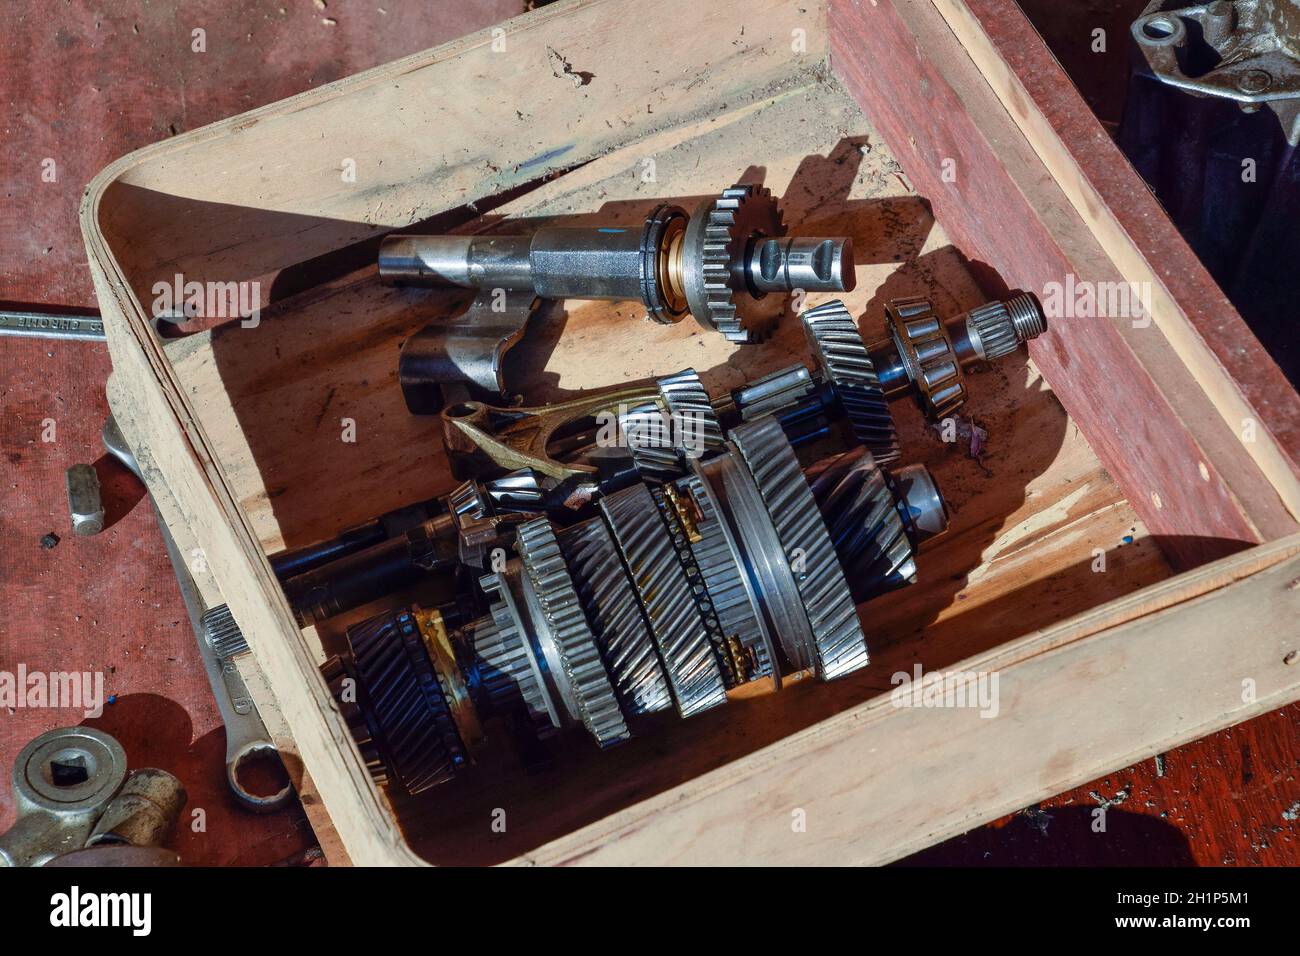 Dismantled box car transmissions. The gears on the shaft of a mechanical transmission. Stock Photo